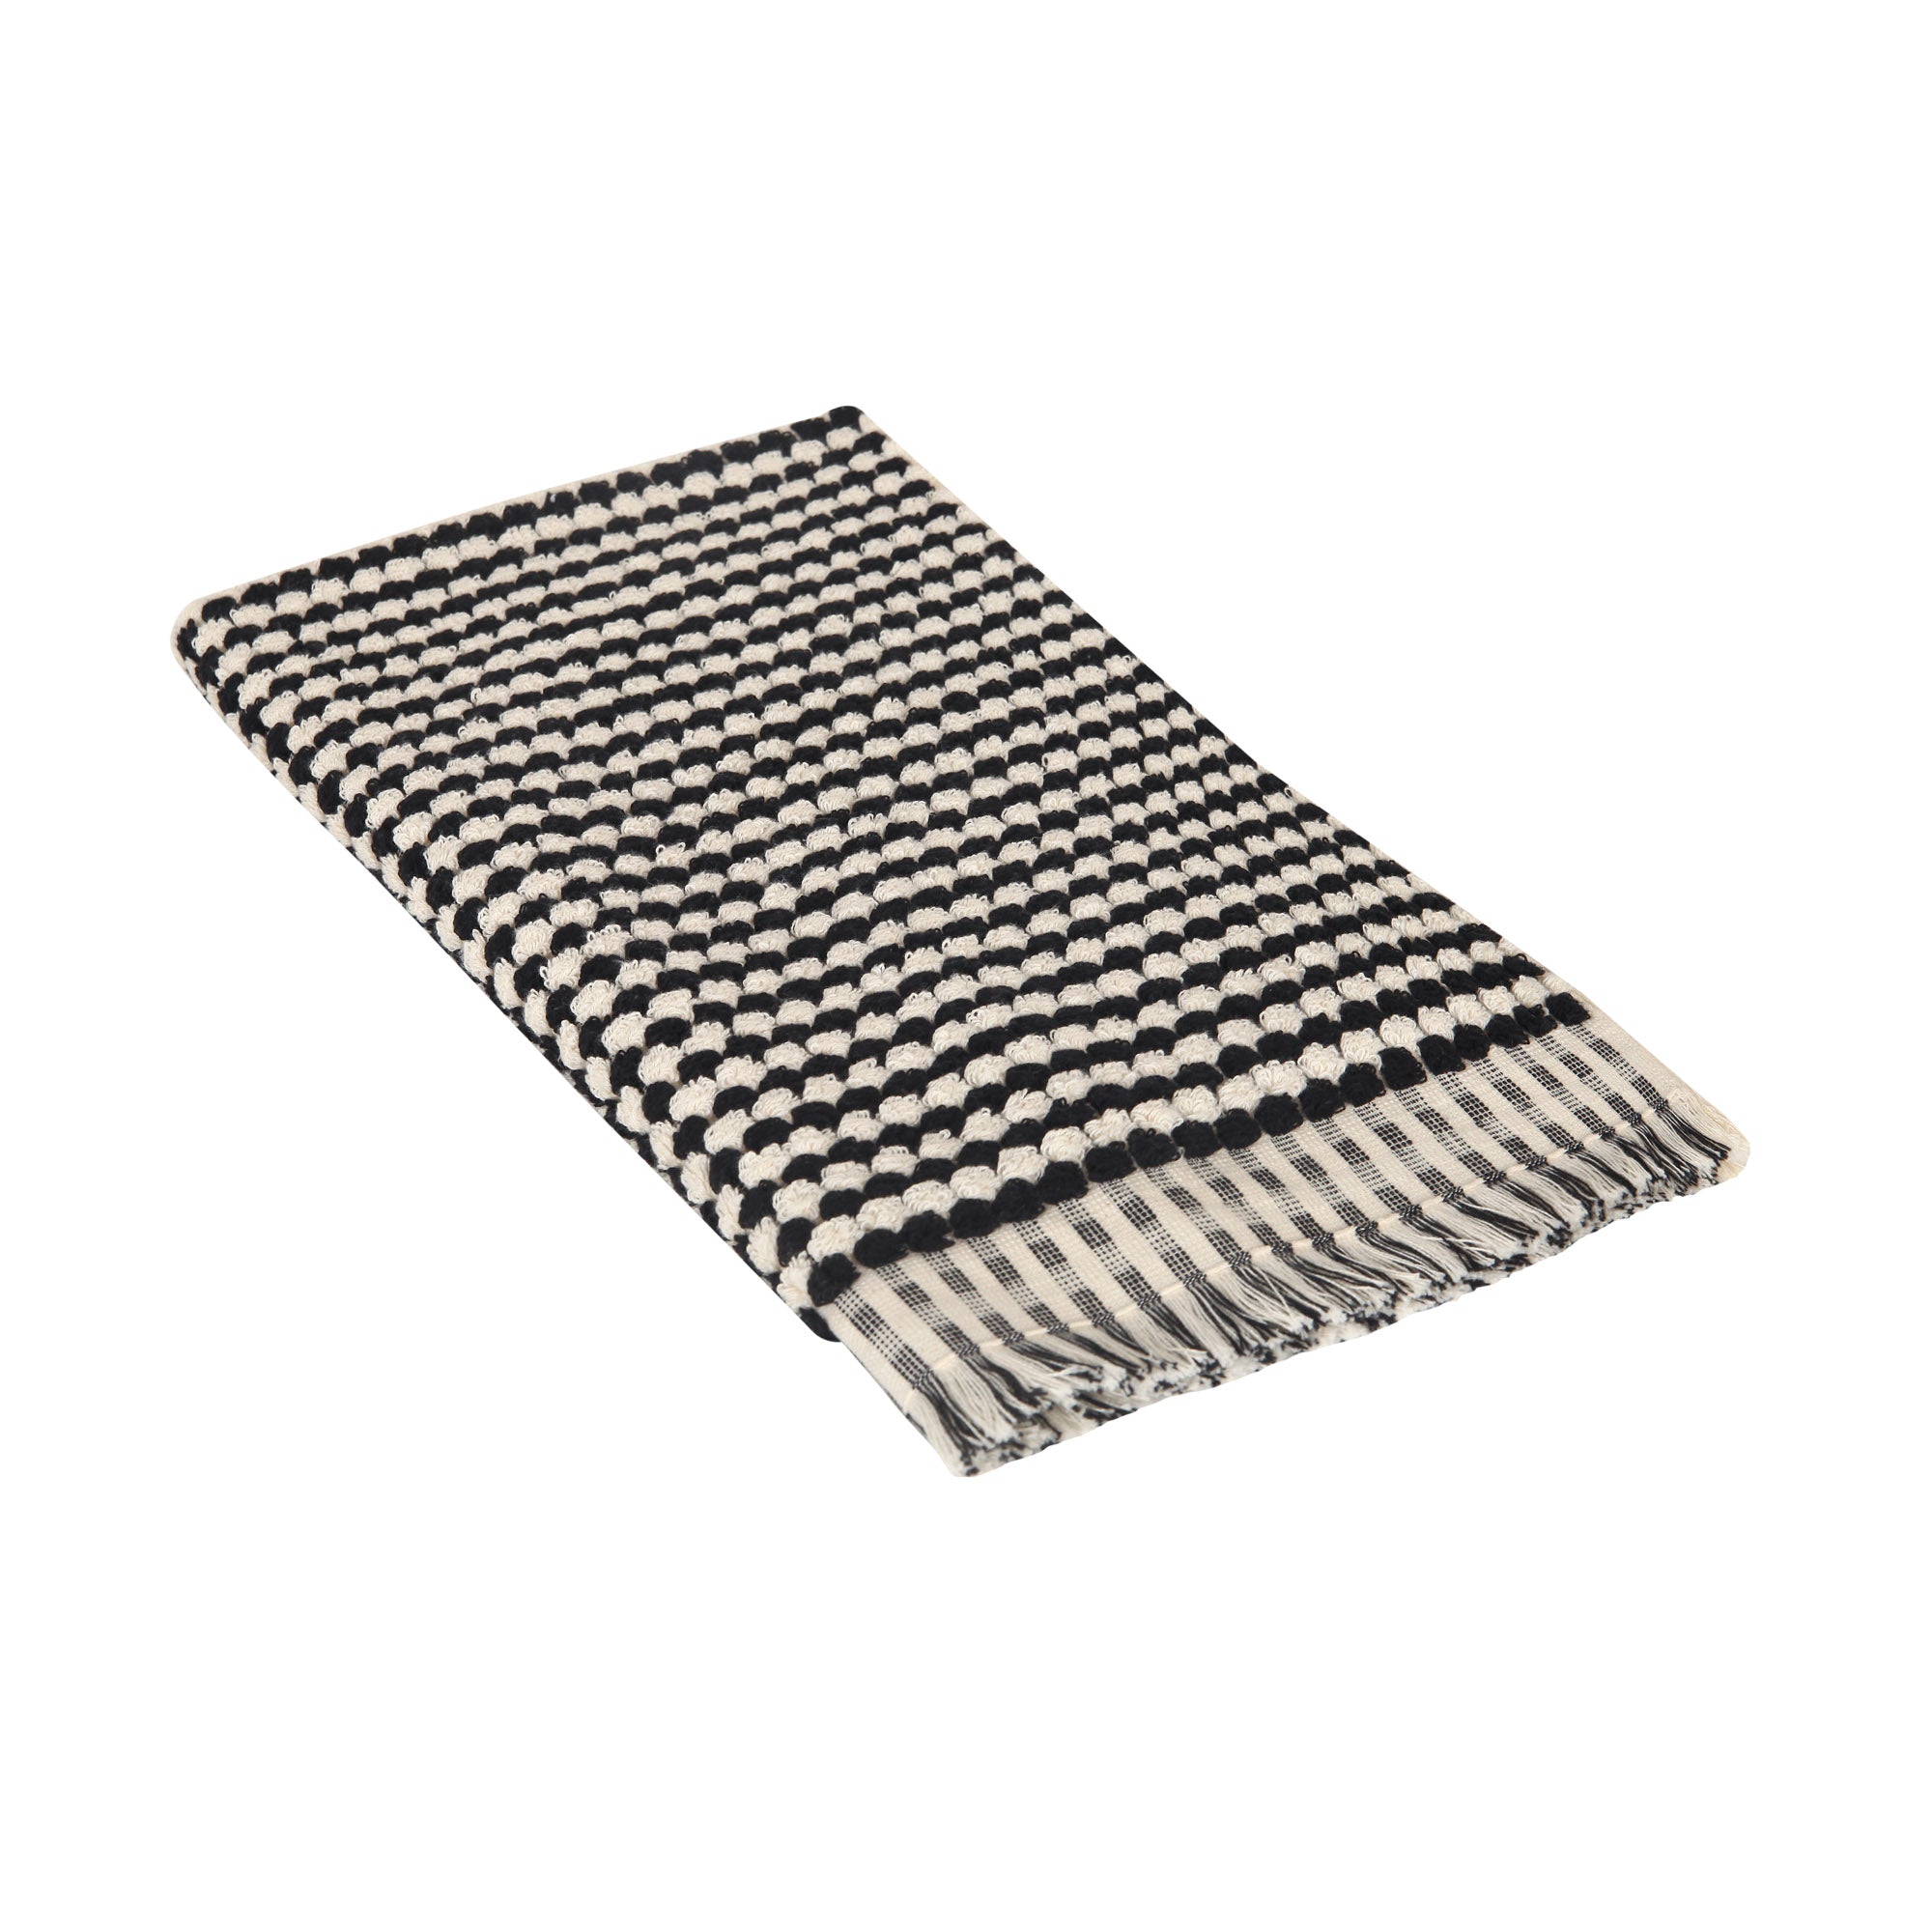 White with Gray Stripe Reversible Bath Mat, 30 in.